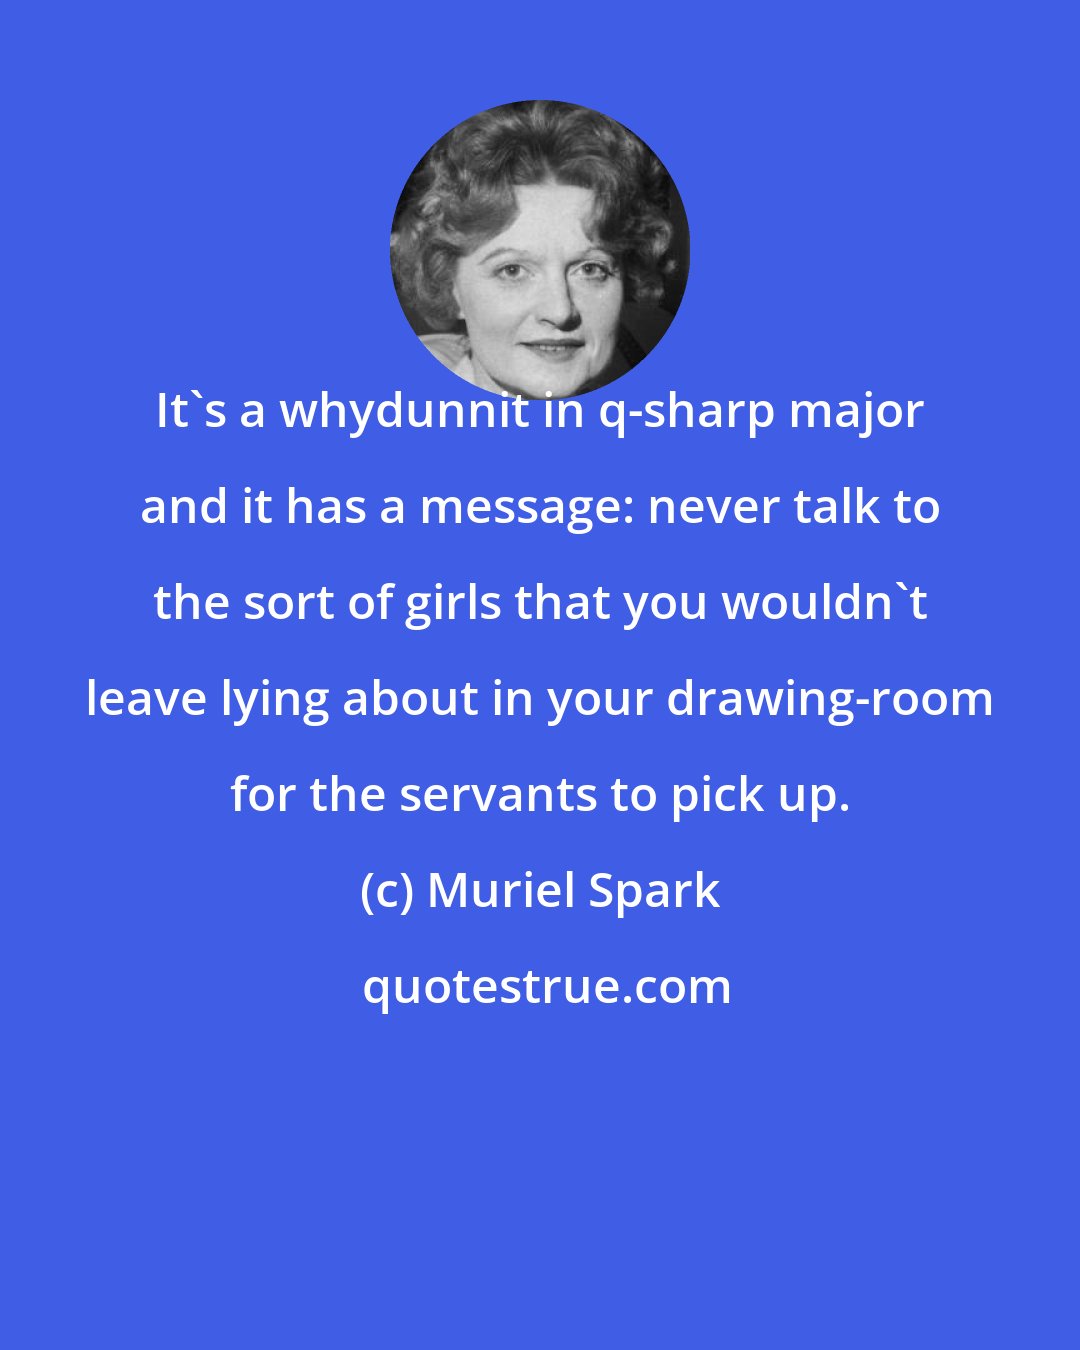 Muriel Spark: It's a whydunnit in q-sharp major and it has a message: never talk to the sort of girls that you wouldn't leave lying about in your drawing-room for the servants to pick up.